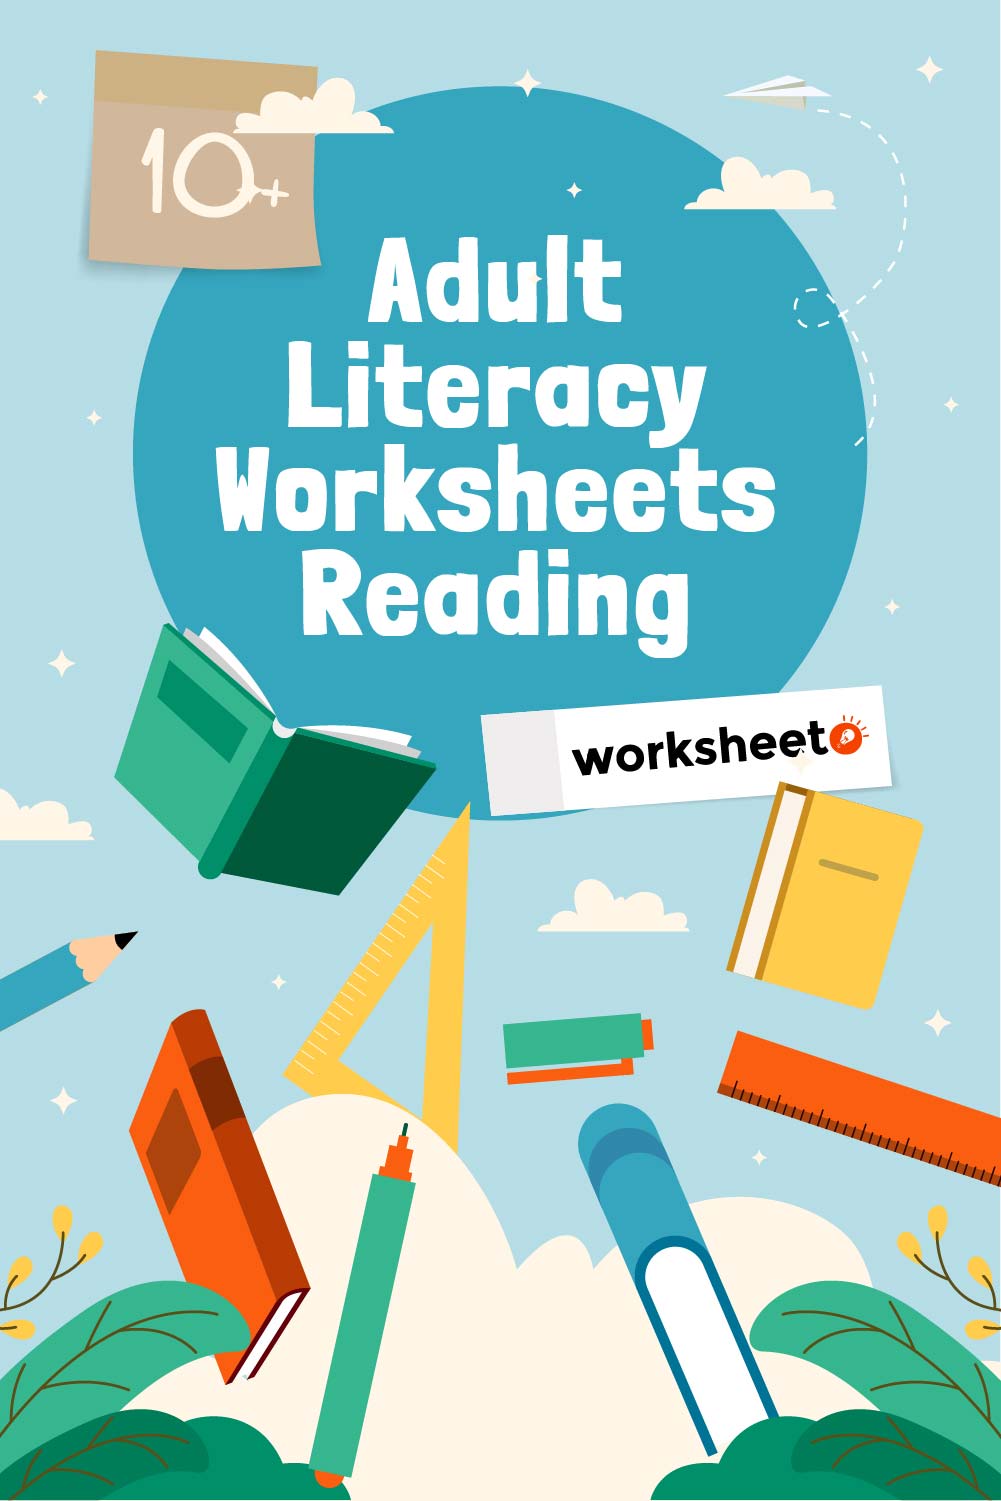 Adult Literacy Worksheets Reading